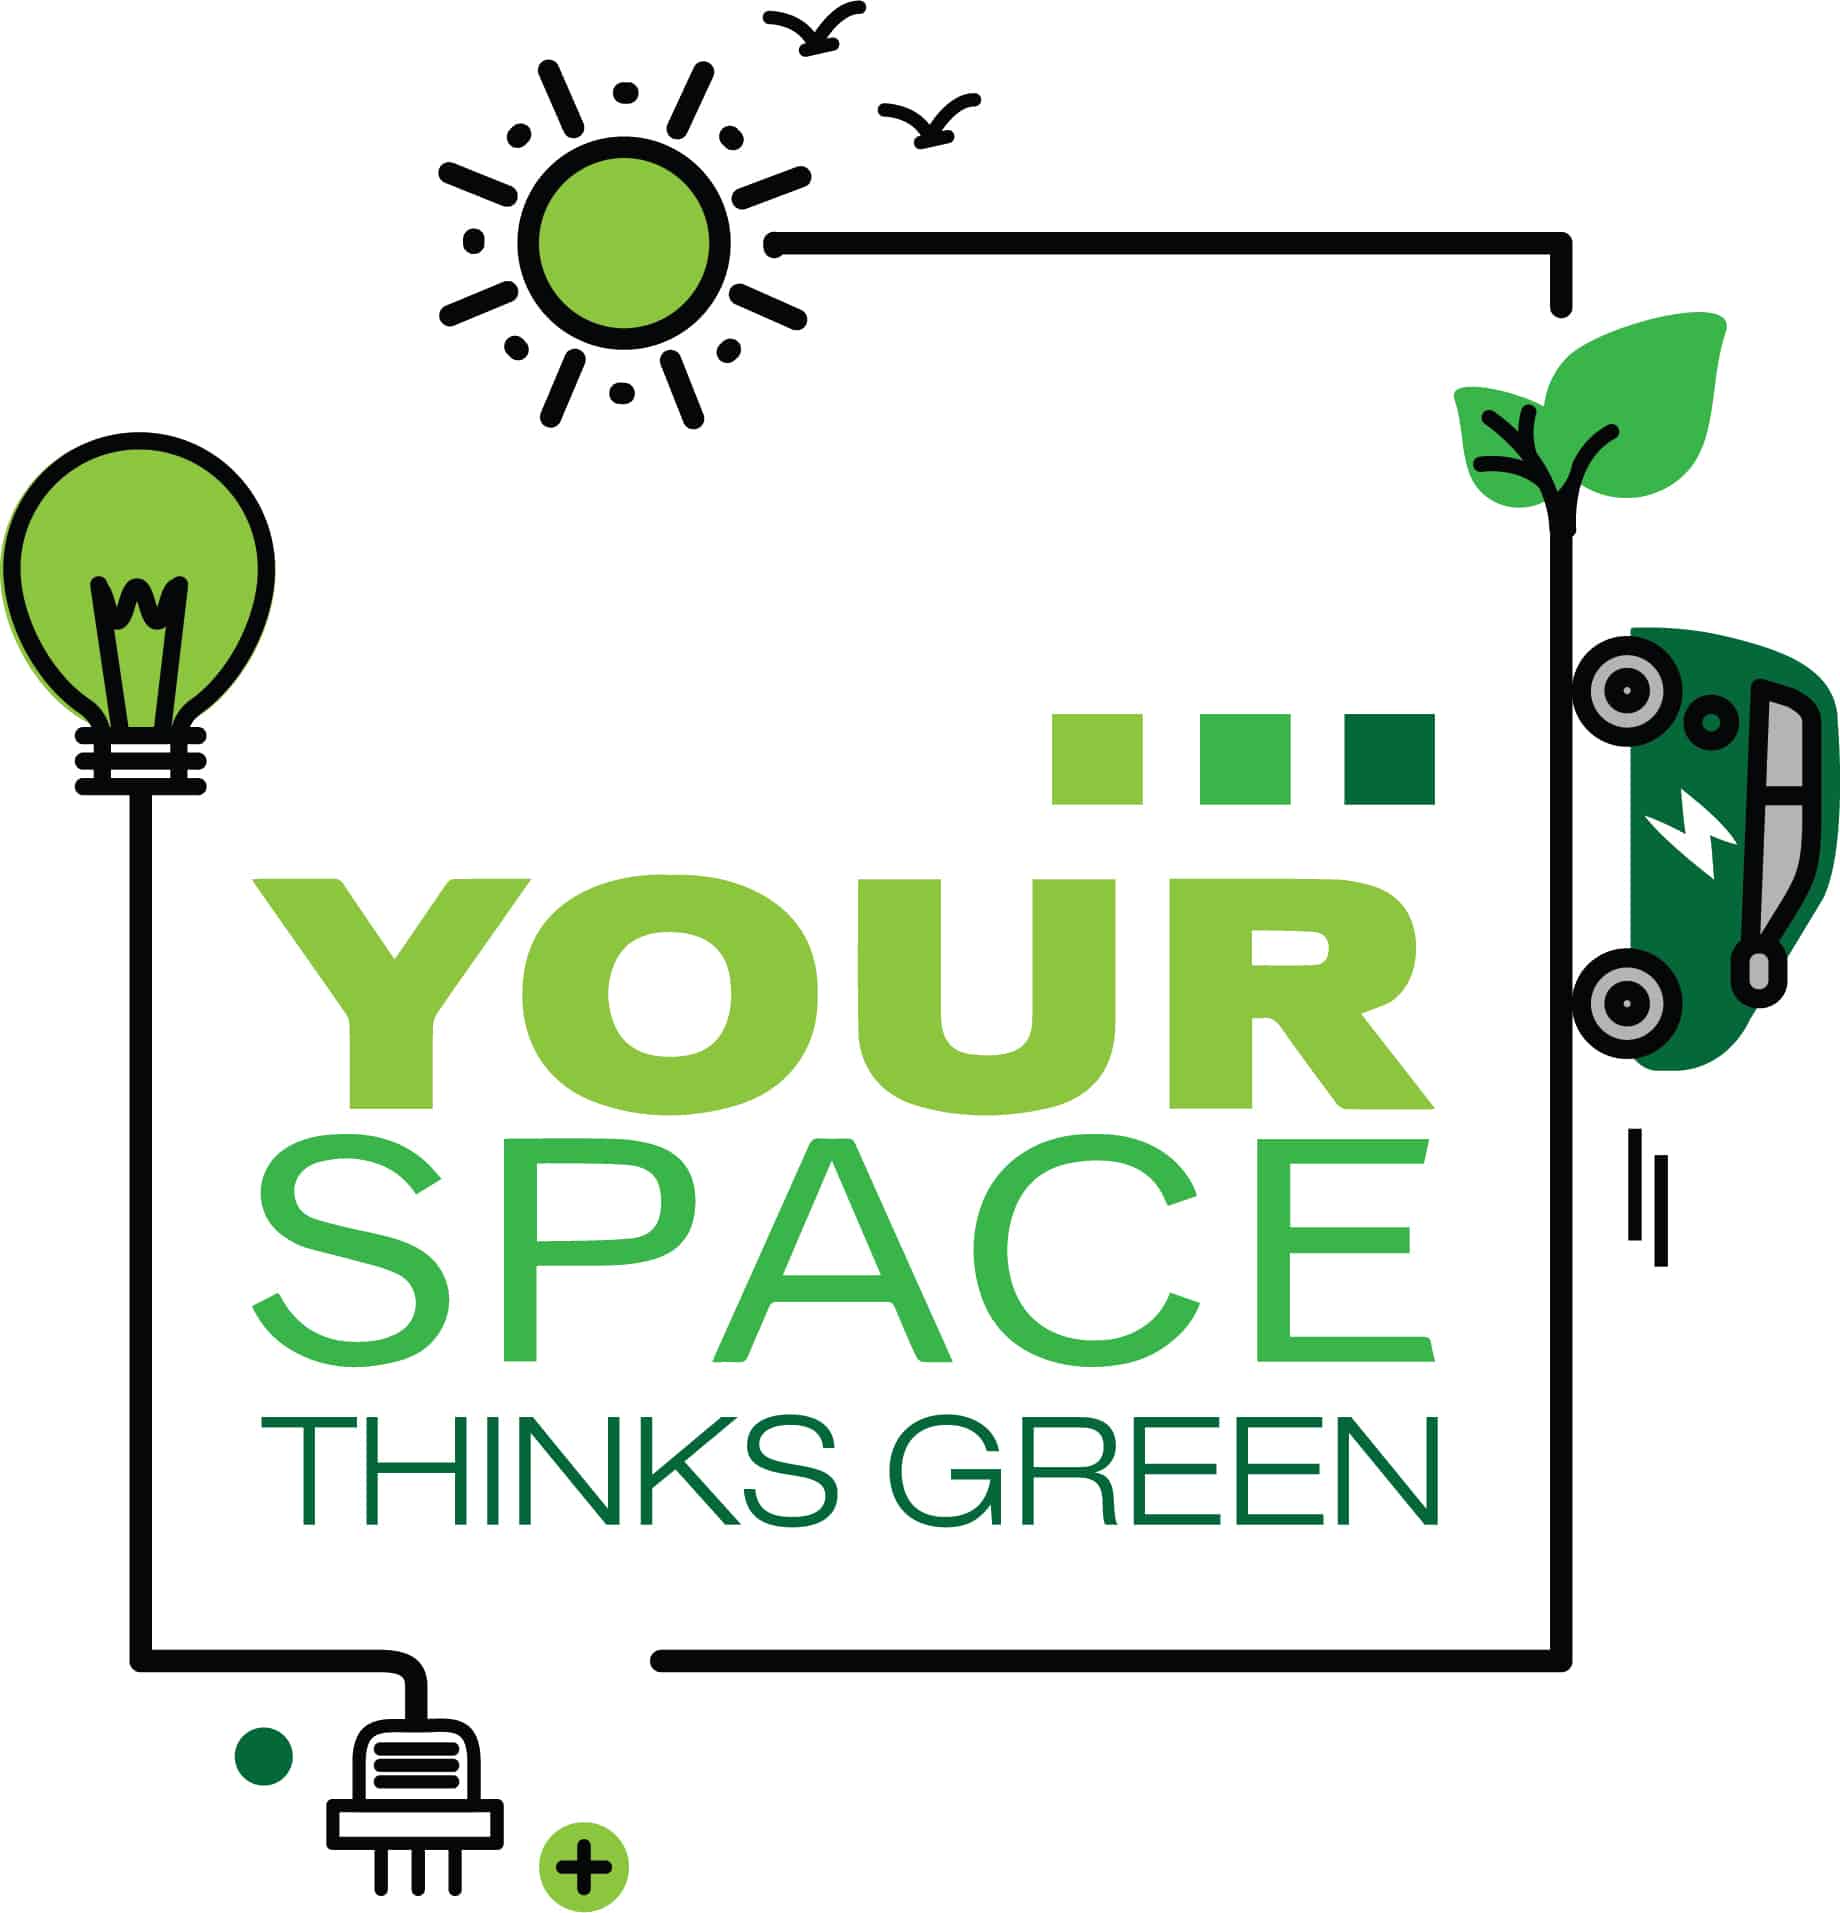 Review Your Space Thinks Green